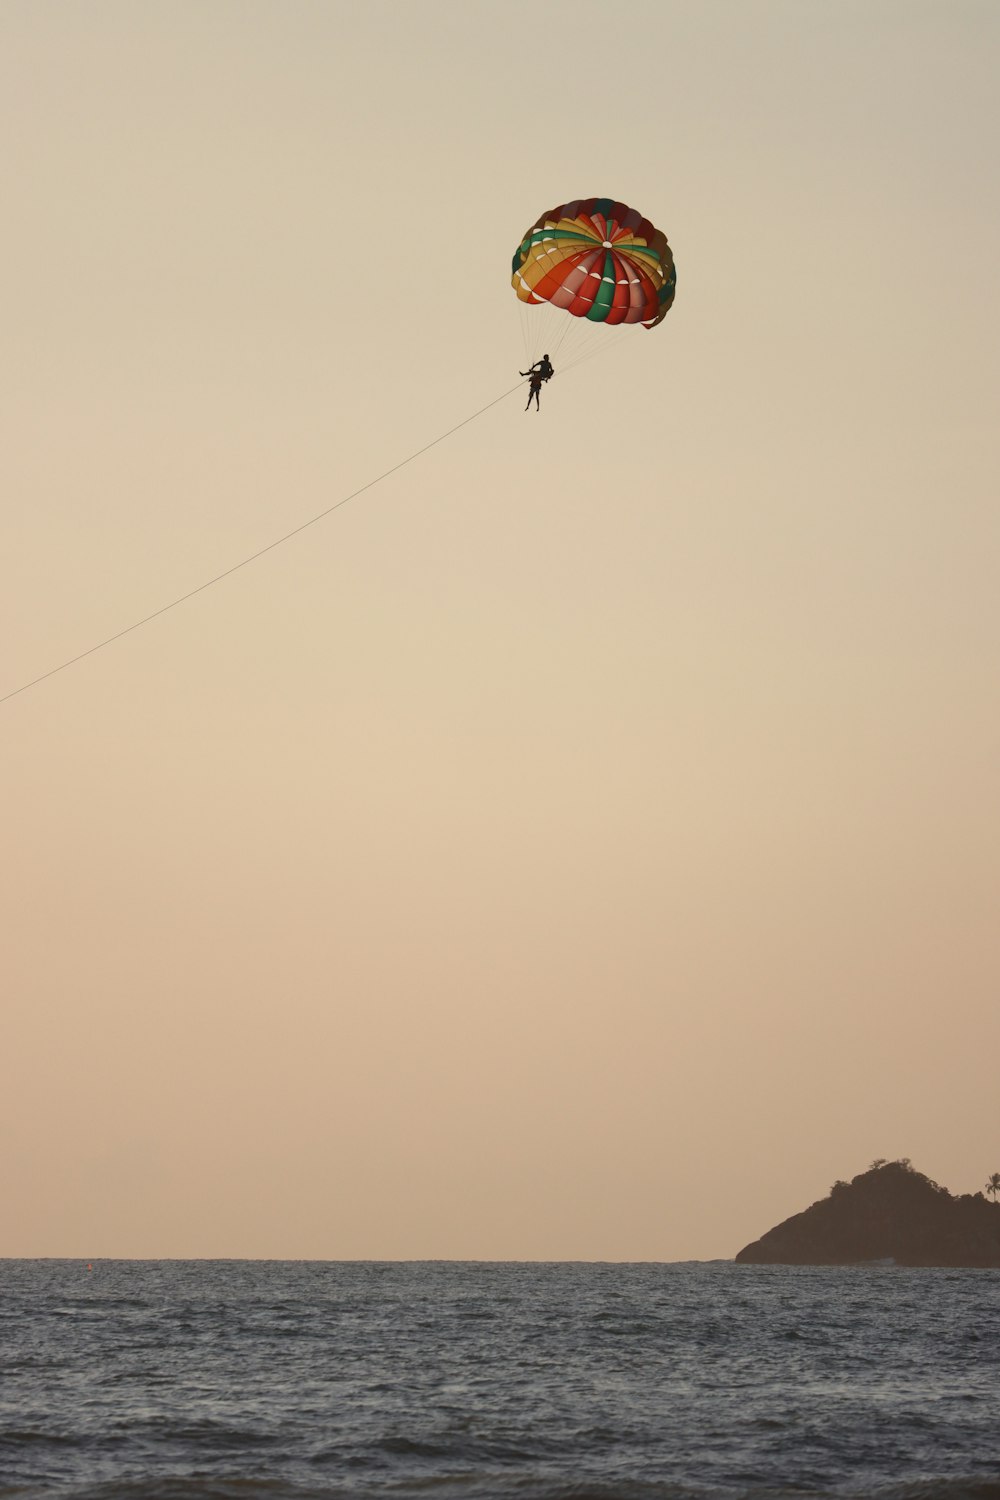 a person is parasailing in the ocean at sunset